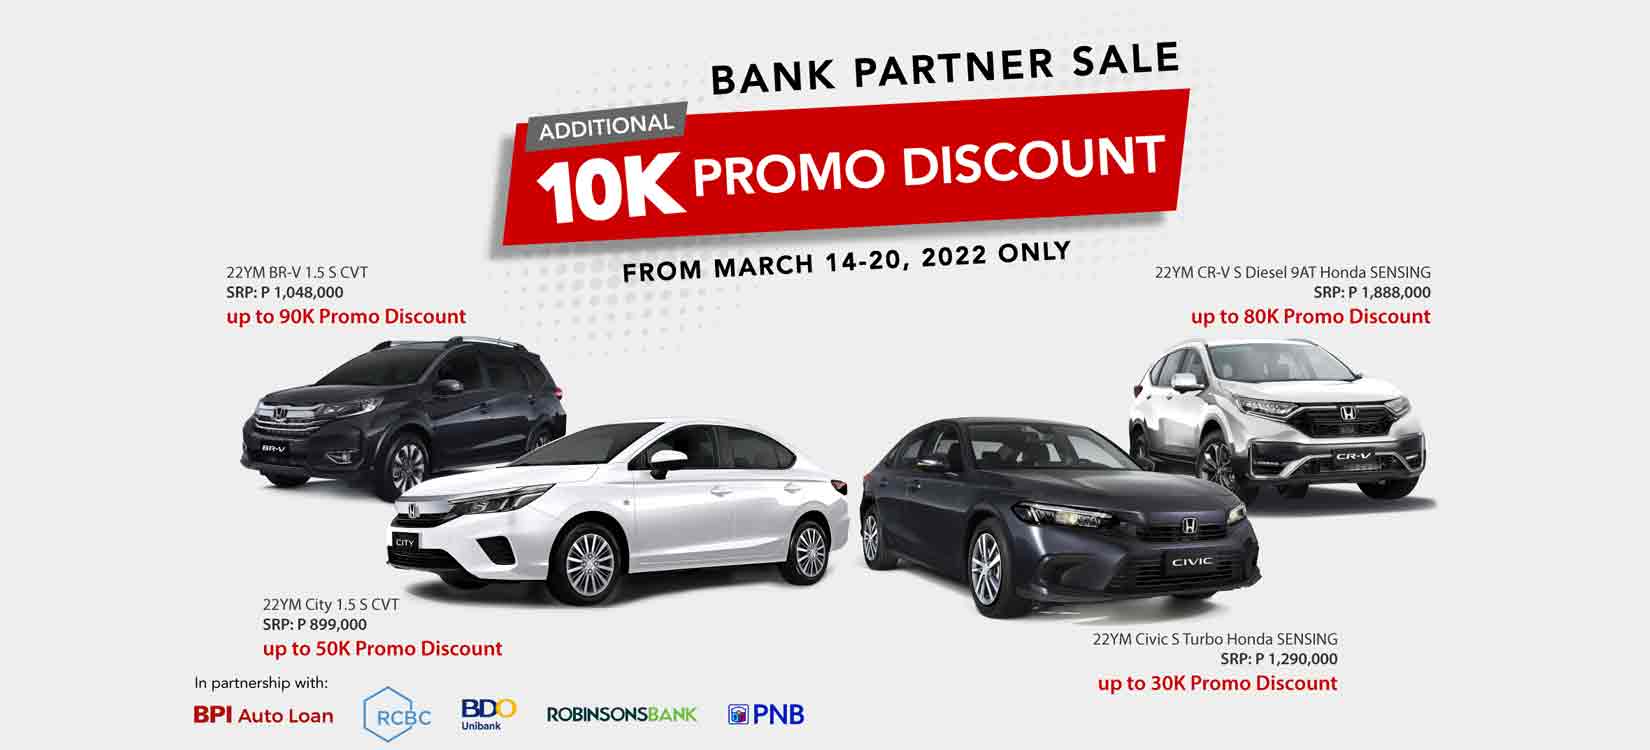 Don’t miss out on Honda’s 2022 Bank Partner Sale until March 20